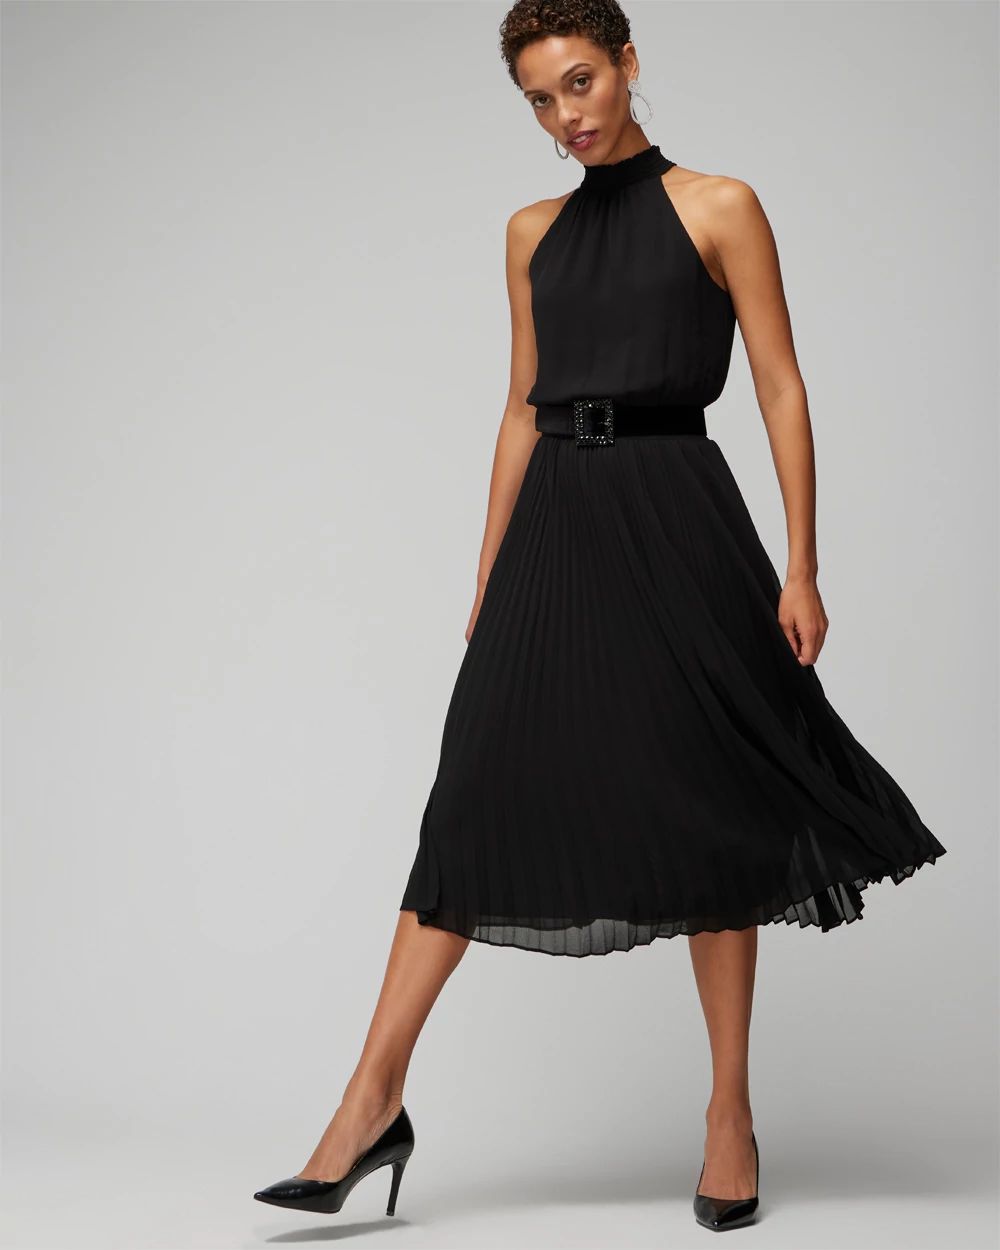 Petite Pleated Halter Midi Dress click to view larger image.